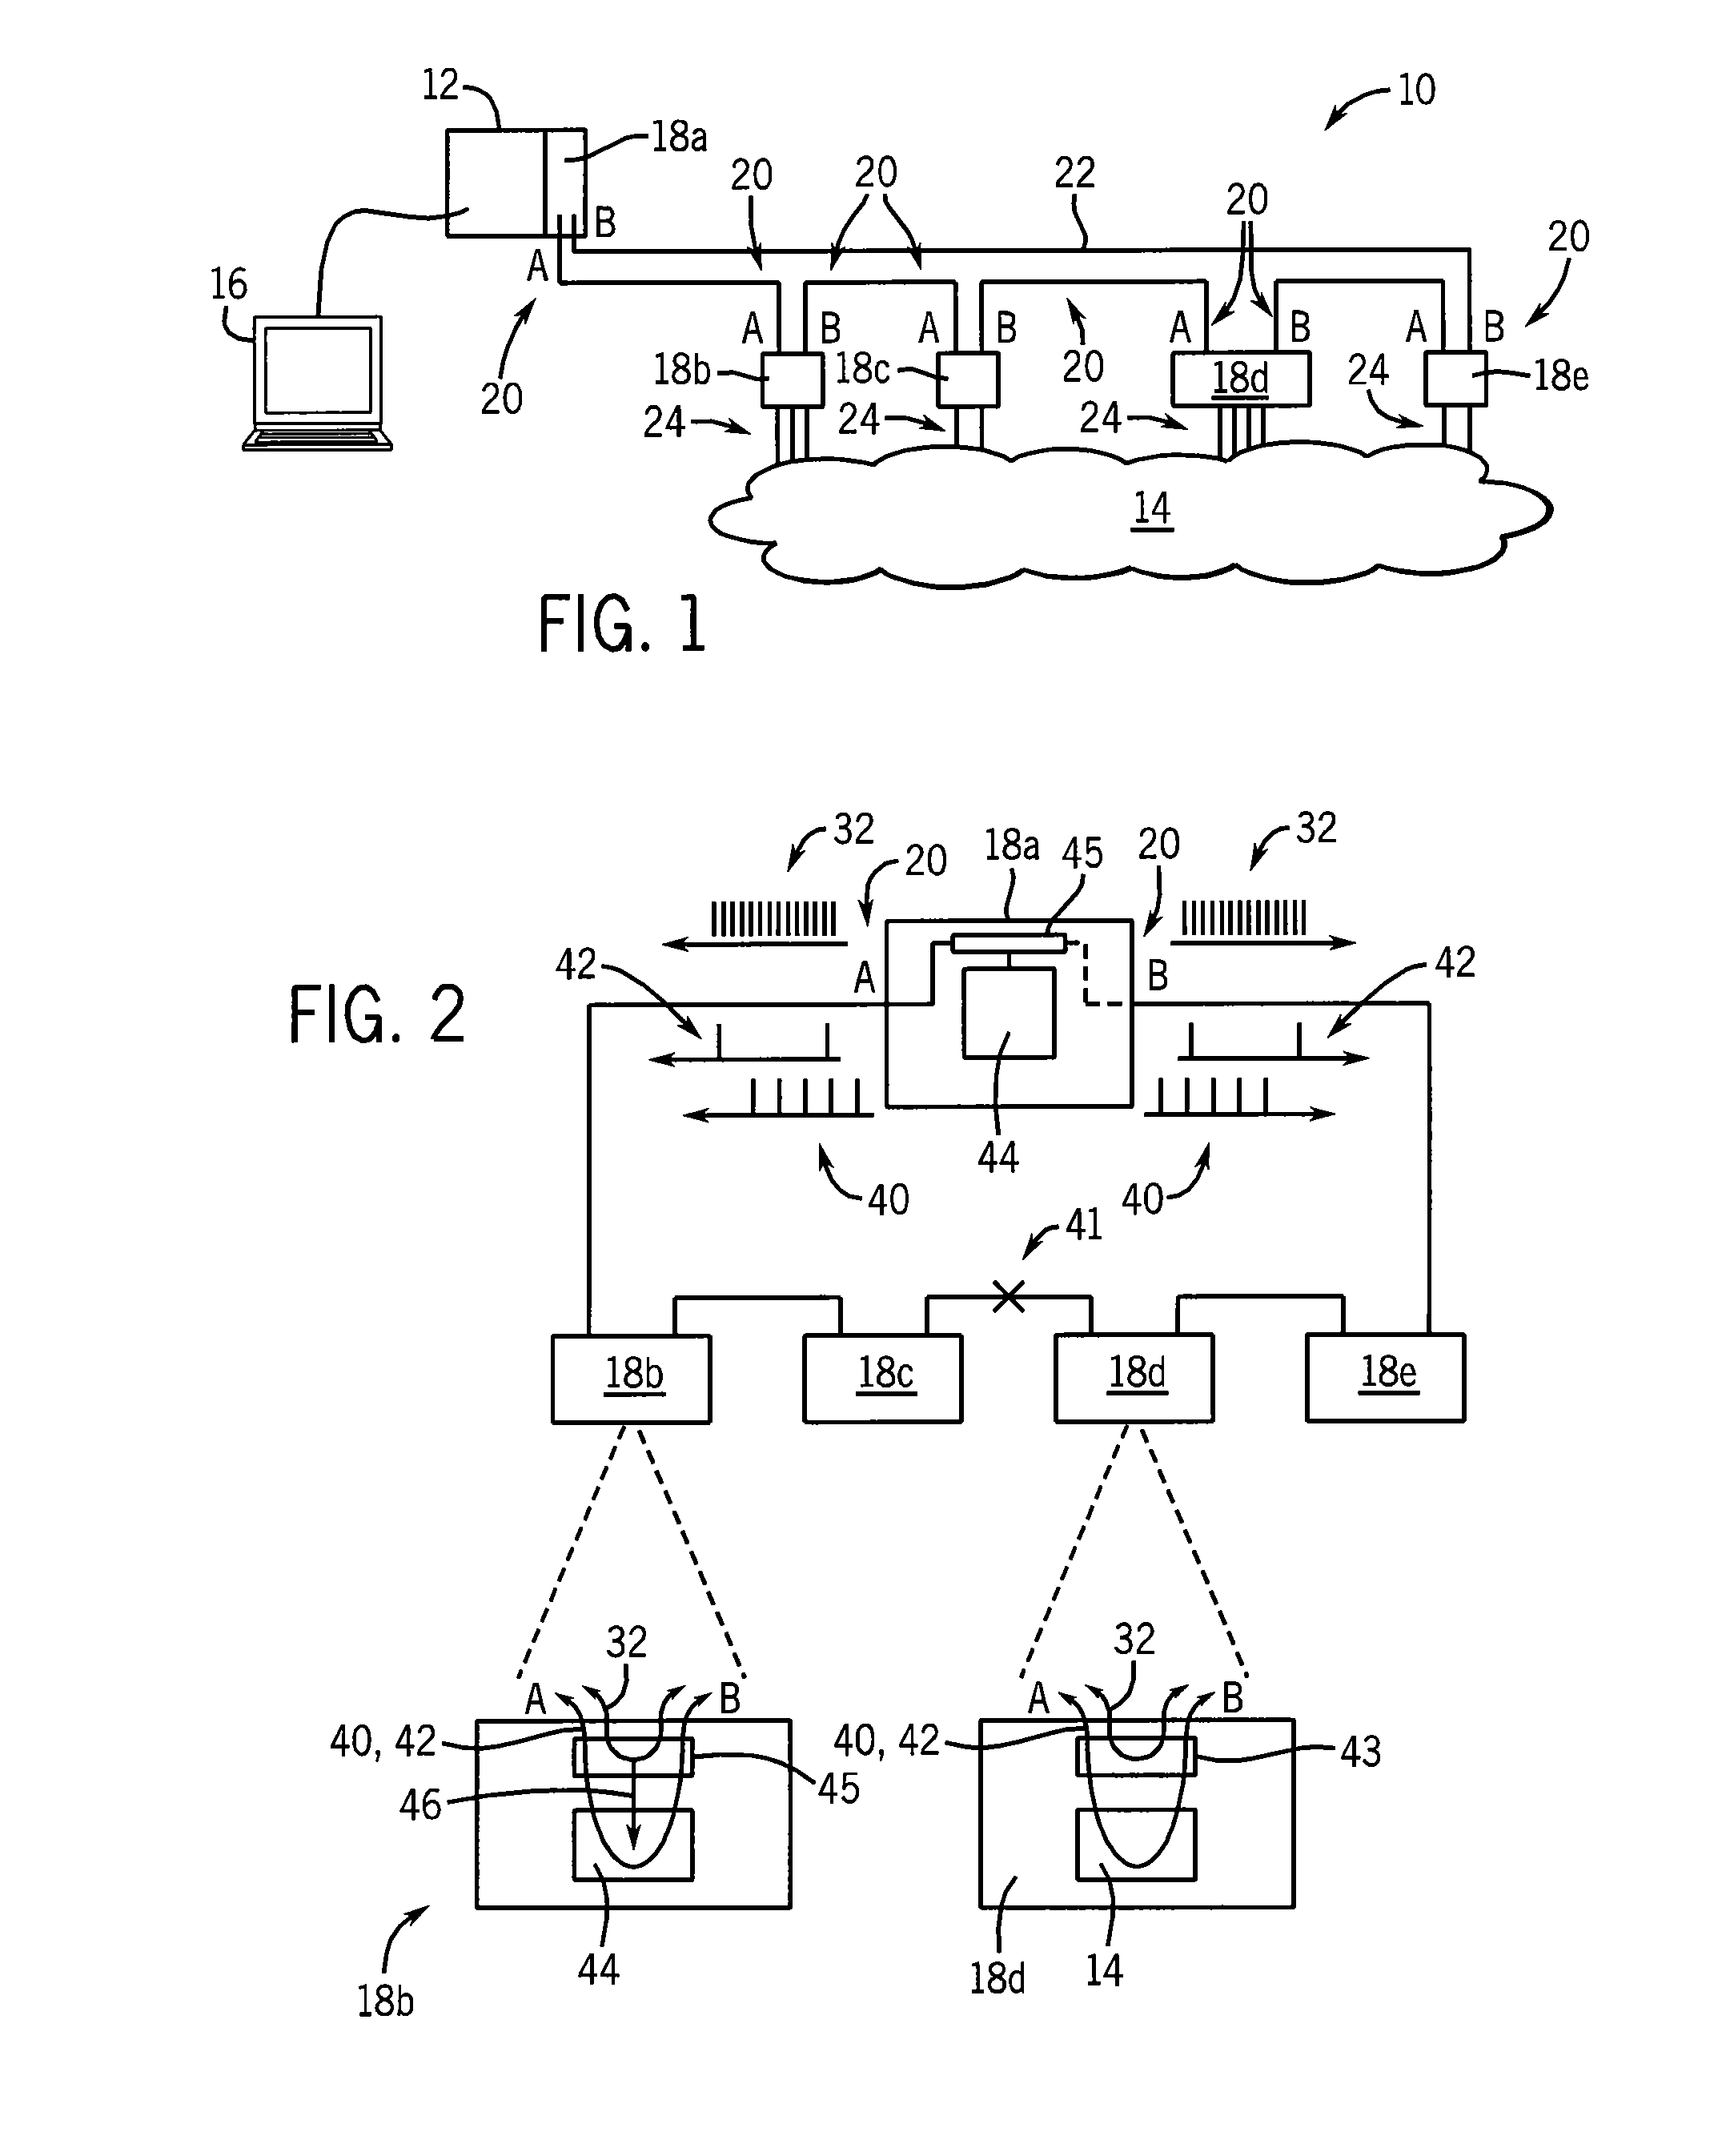 Industrial controller employing the network ring topology